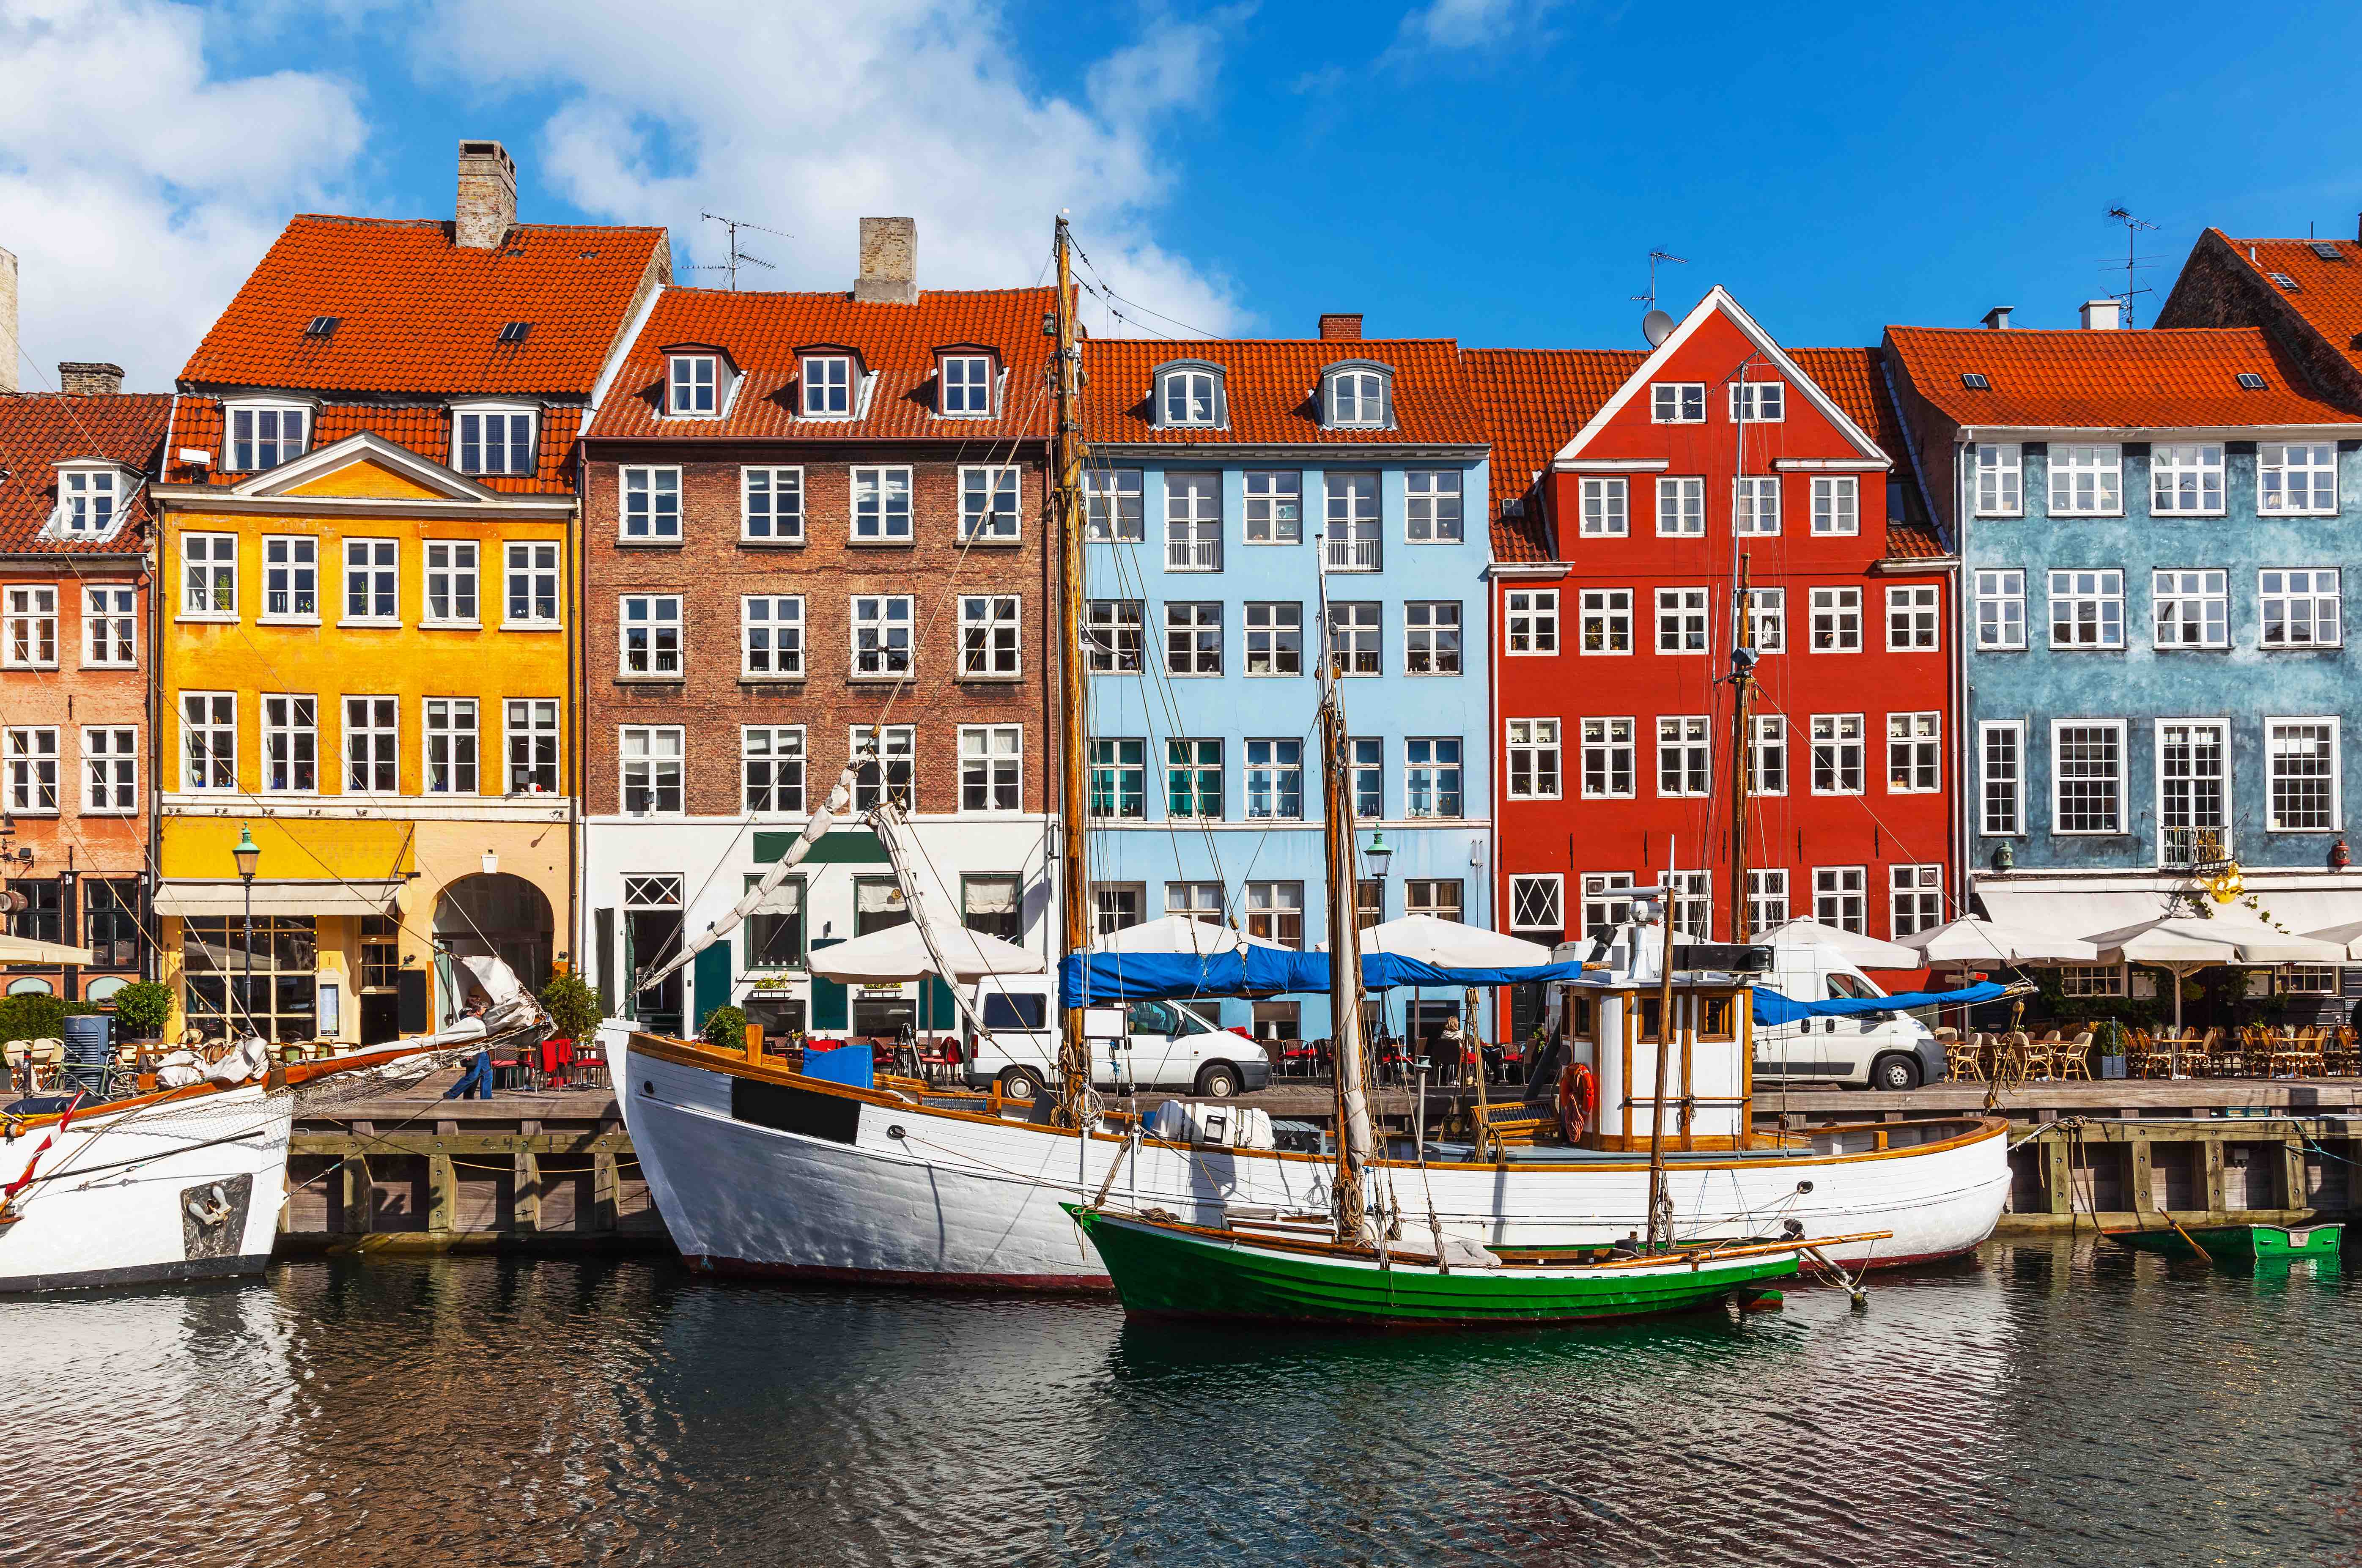 In Denmark mortgage interest is paid by the bank, not by the borrower